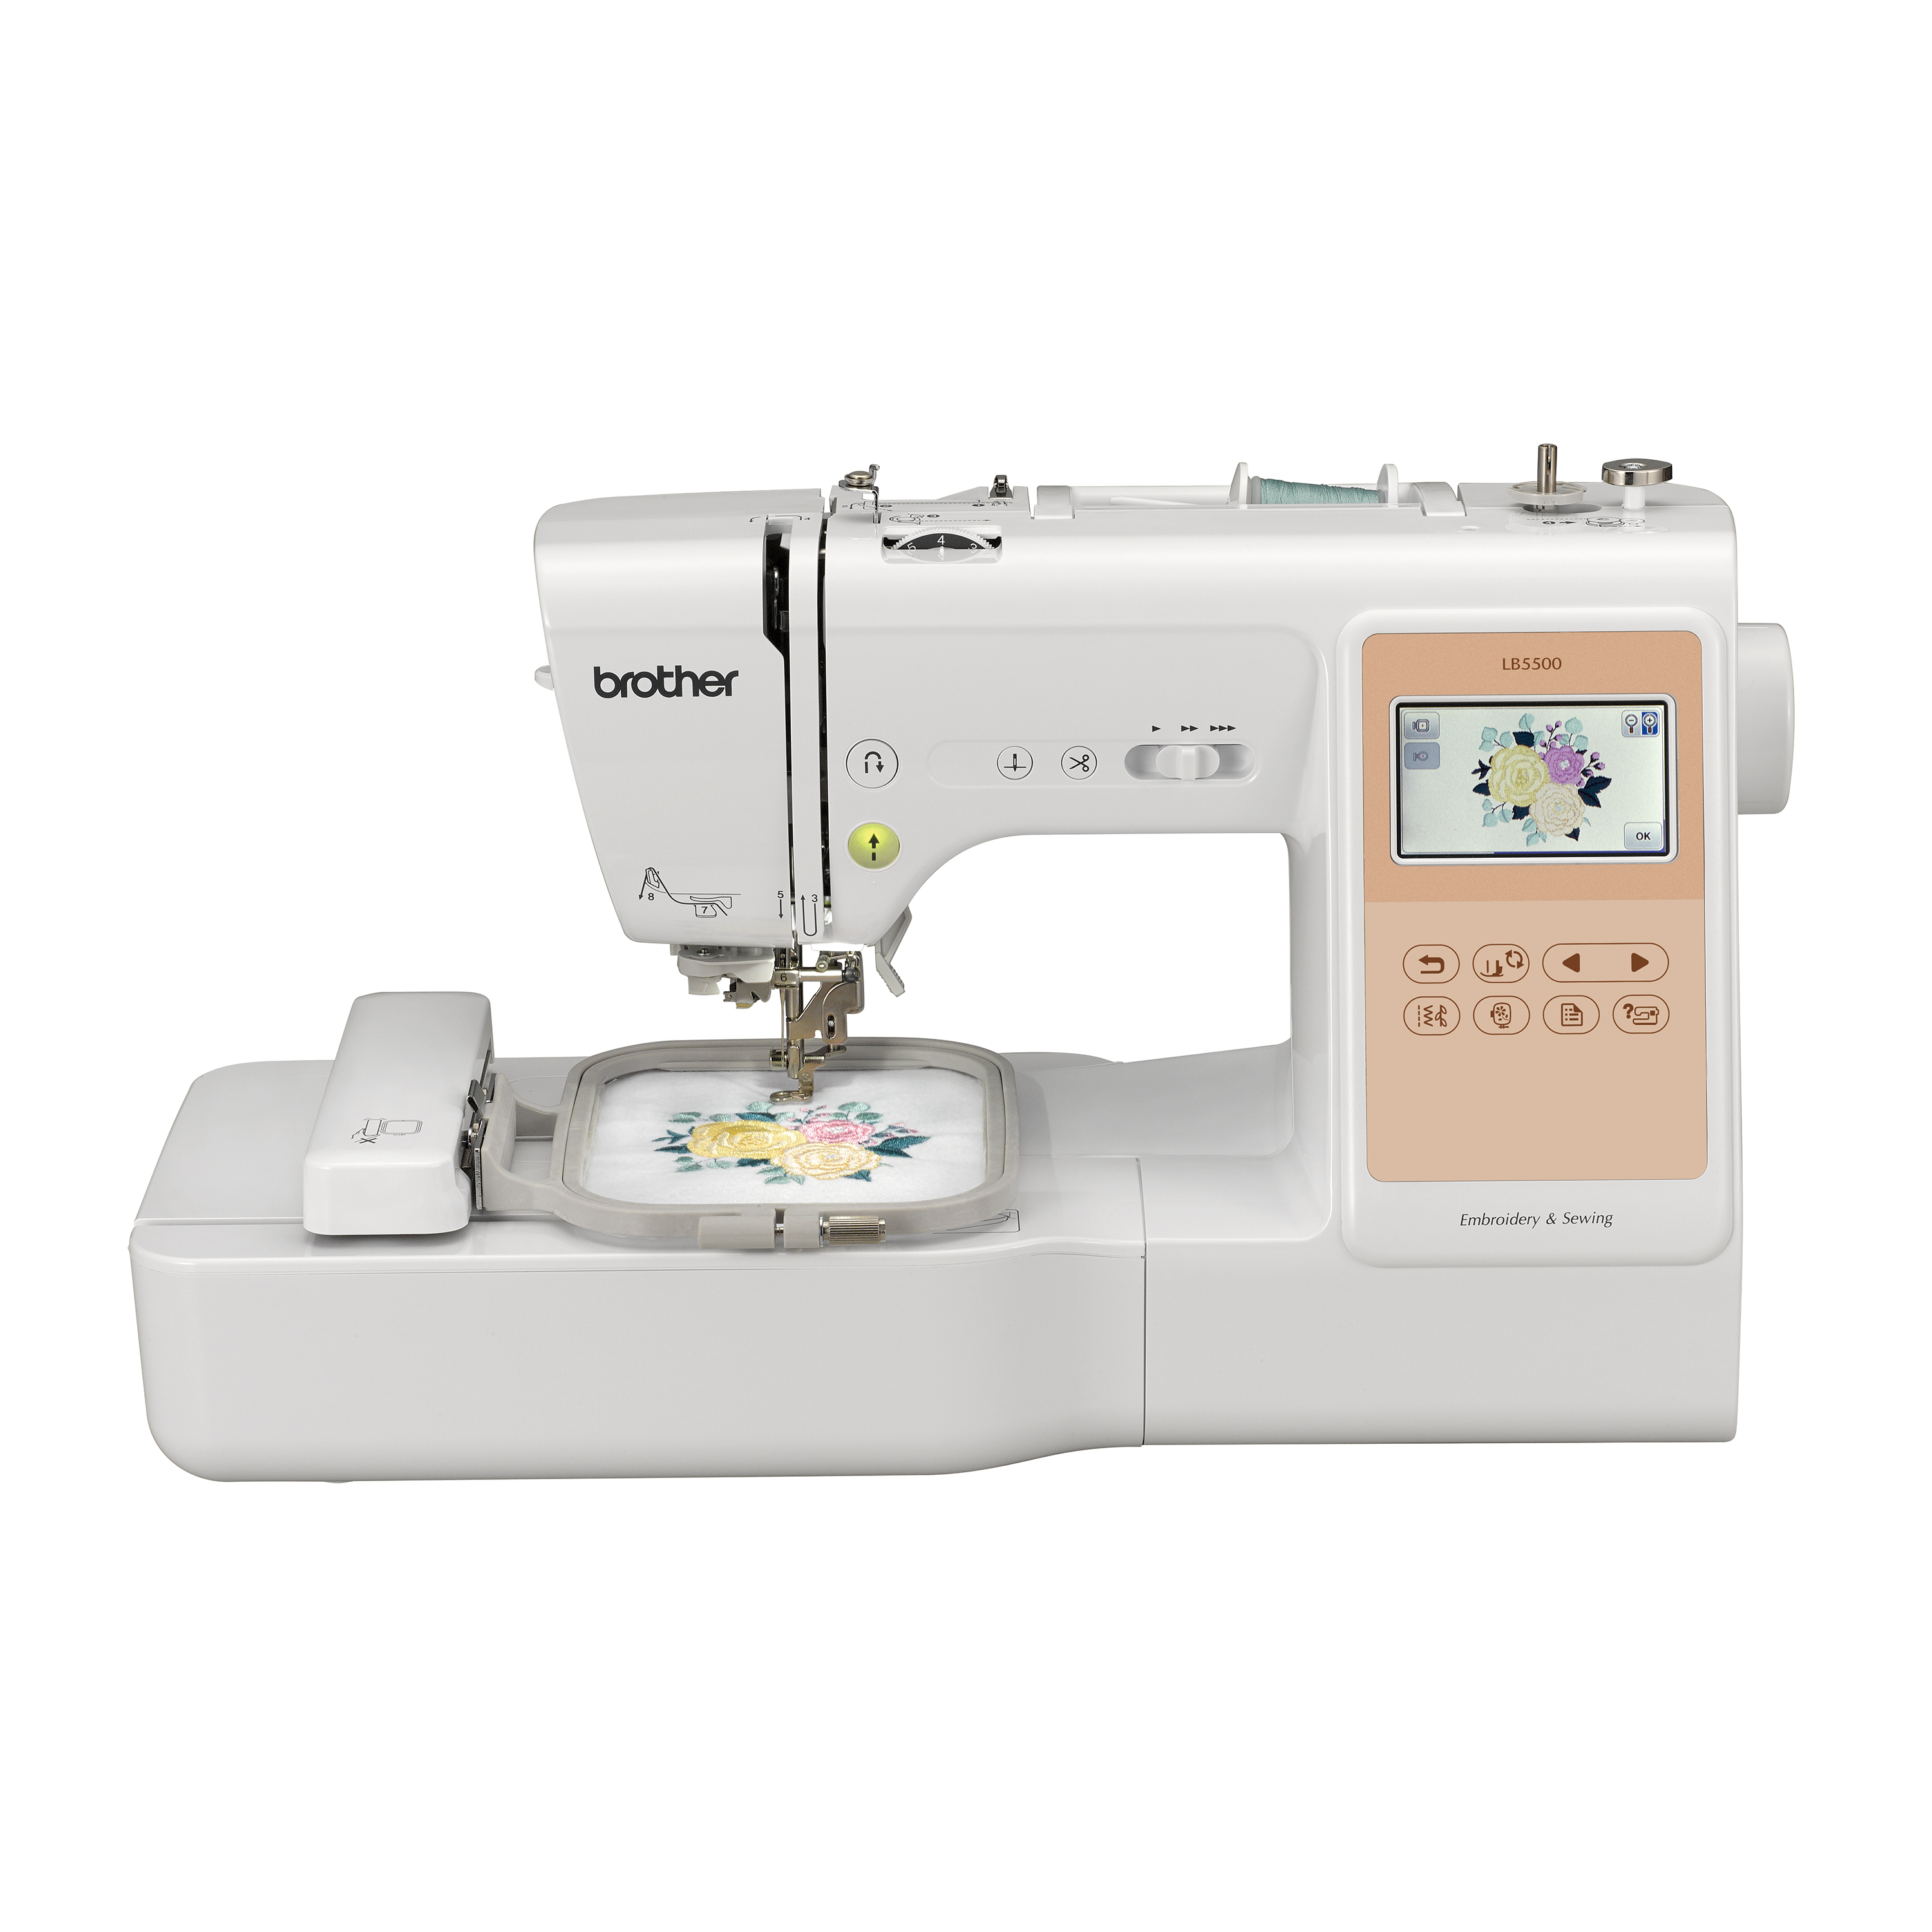 Digital Embroidery Machine, Brother LB5000 for Sale in Stockbridge